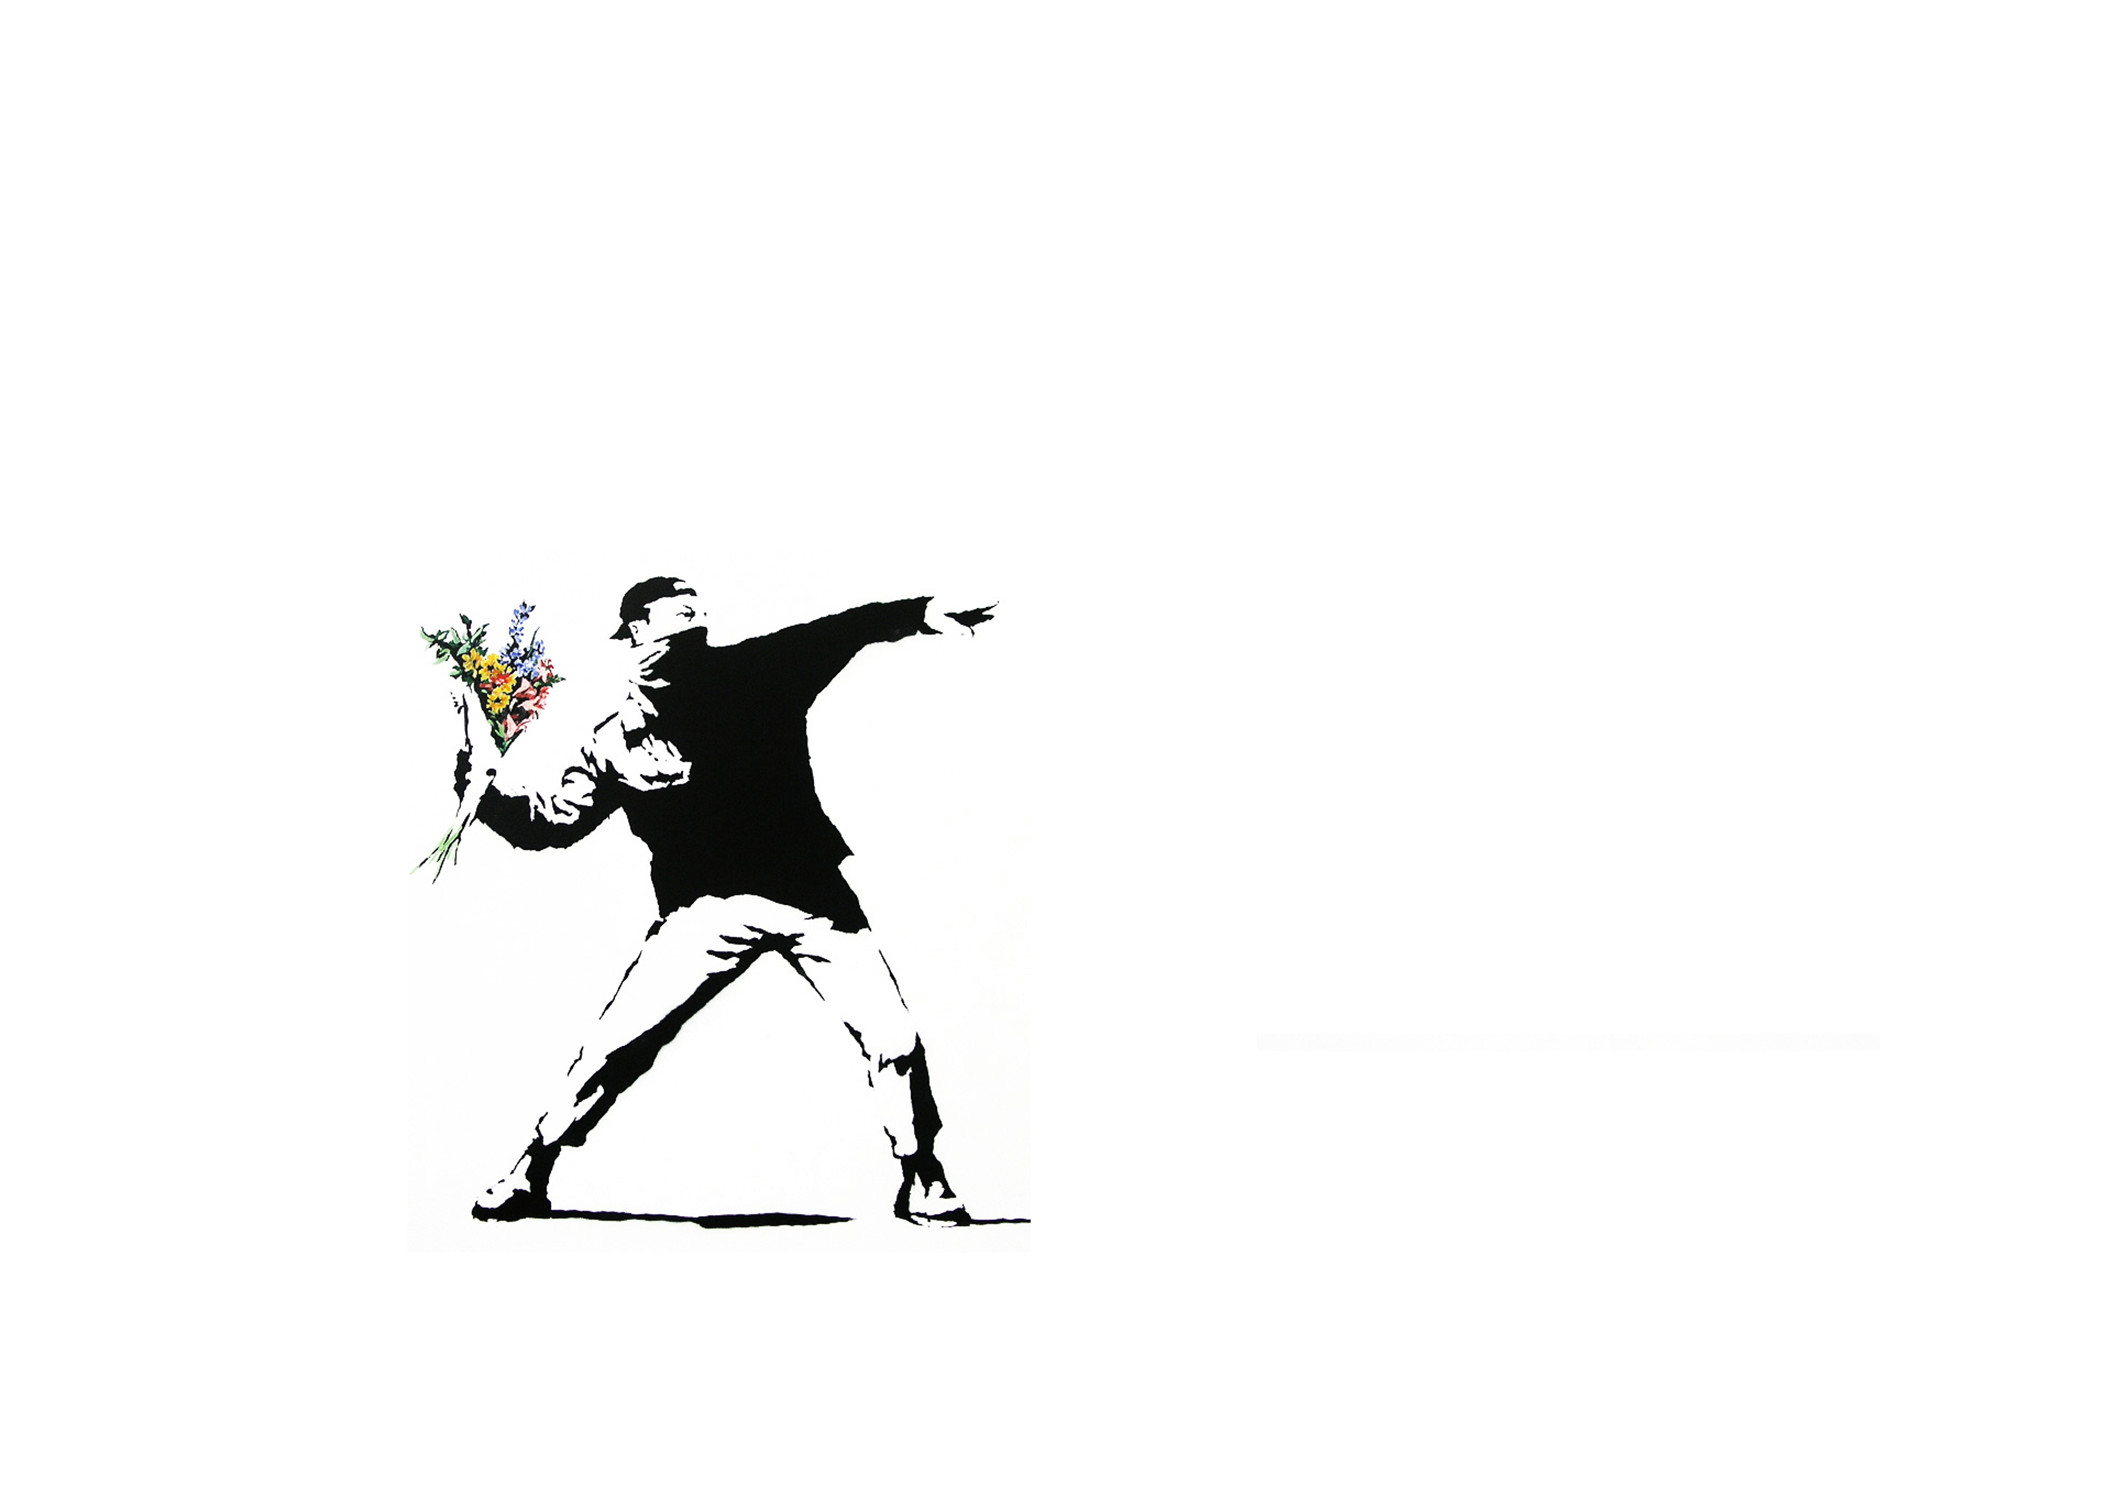 2112x1500 ... Banksy backgrounds Follow Your Dreams Load 32 more images Grid view ...